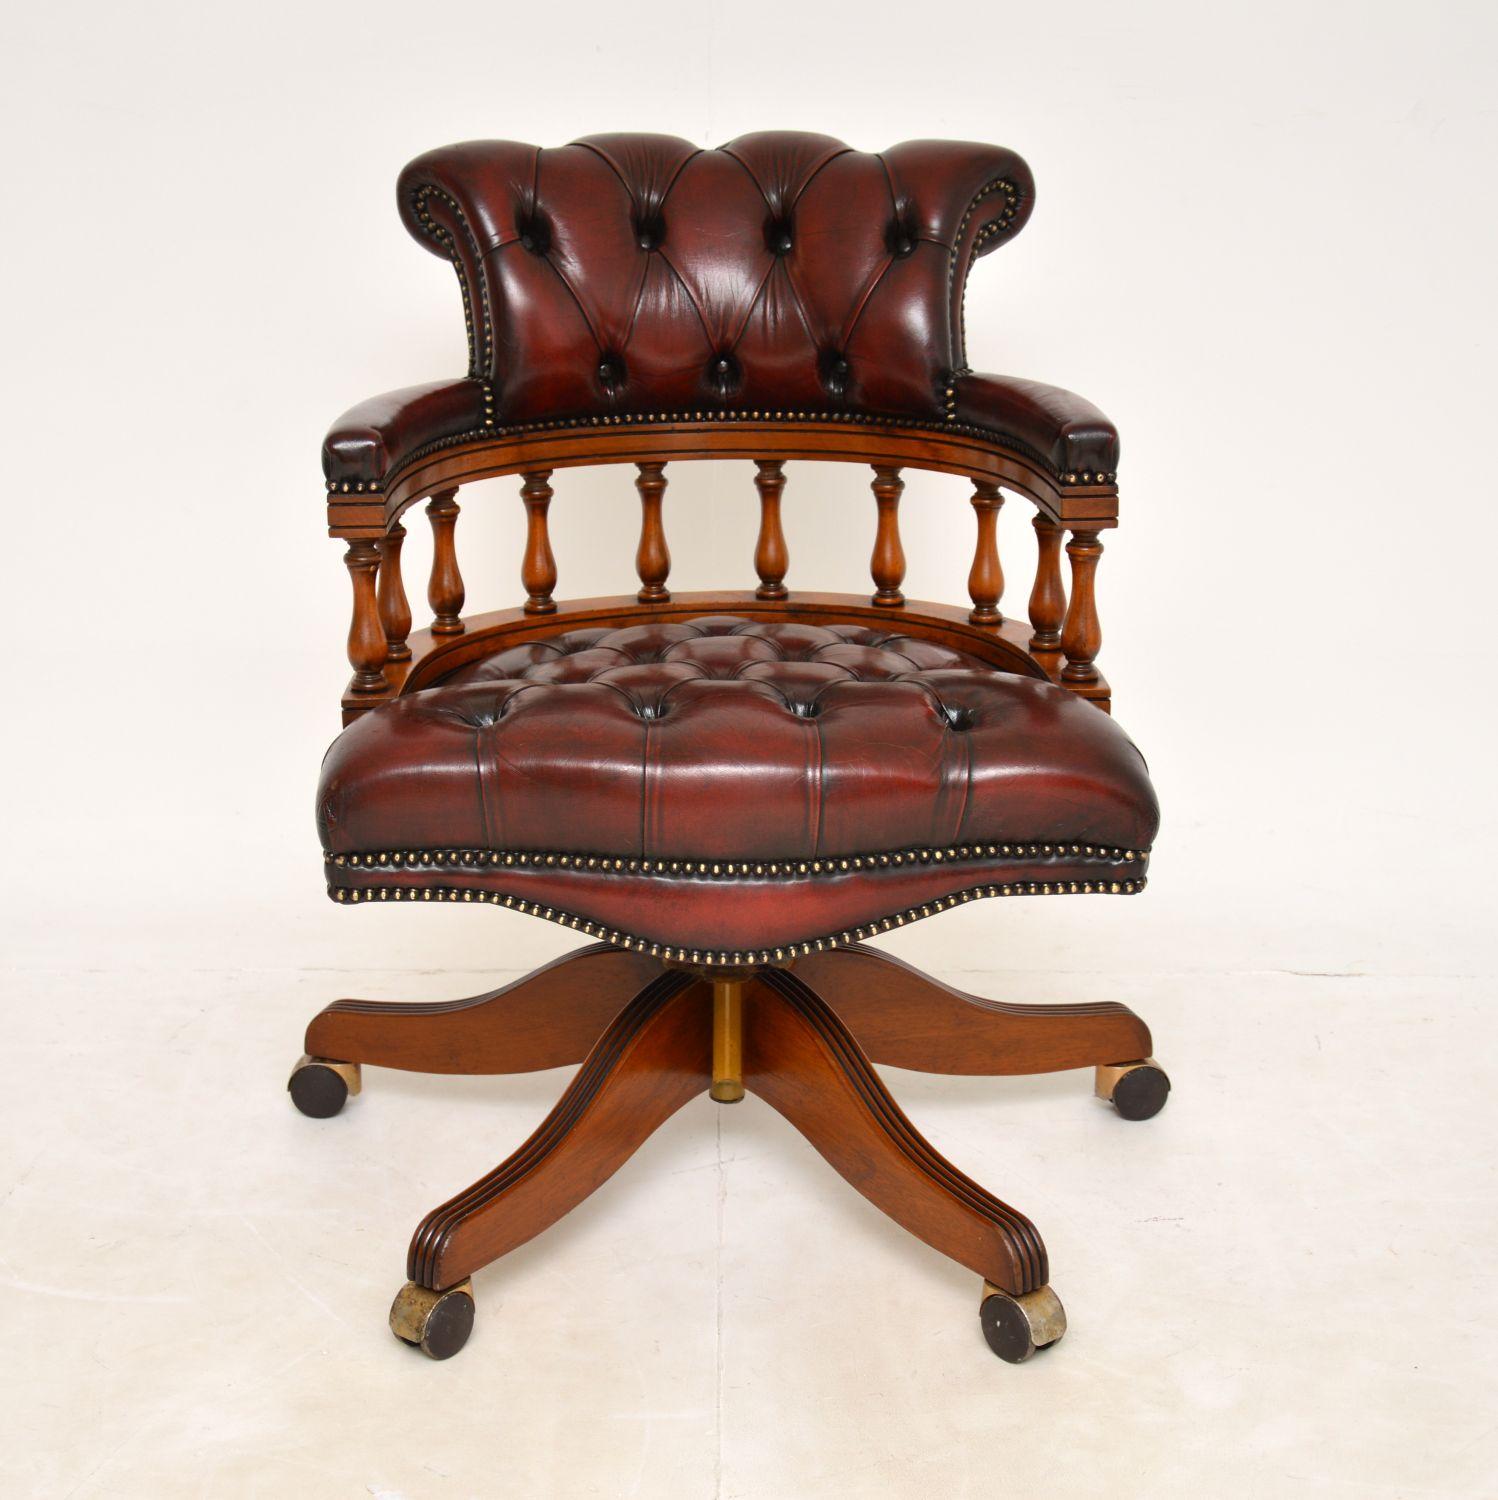 A smart and very well made deep buttoned leather captains desk chair in the antique Victorian style. This was made in England, it dates from around the 1960’s.
It is of excellent quality, and is very comfortable. The seating area is very generous